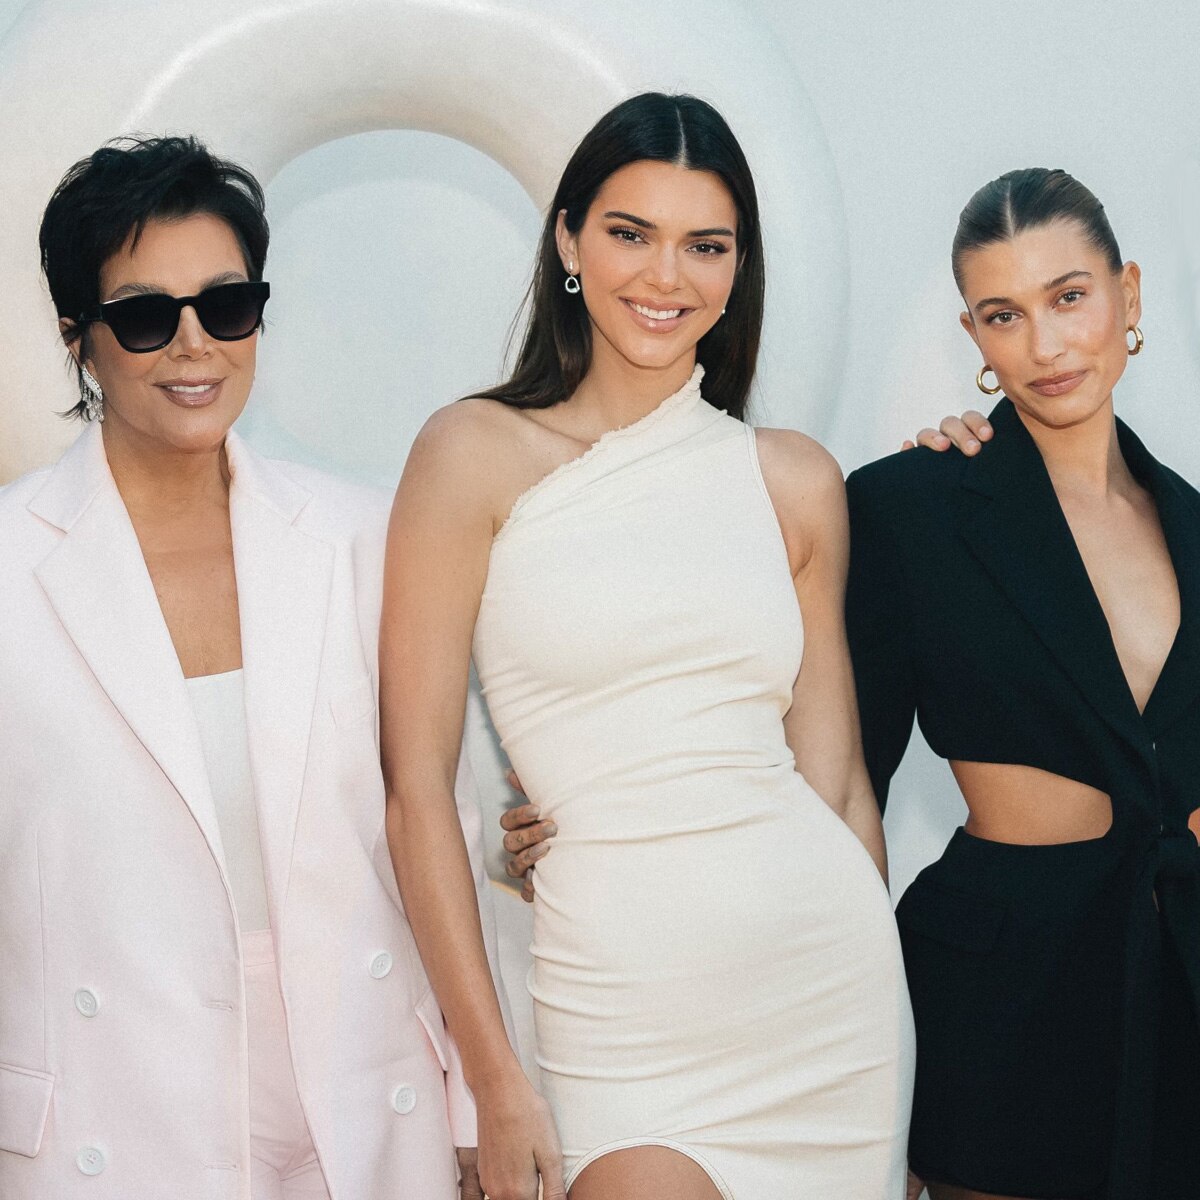 Eight Reserve by 818 Party, Kris Jenner, Hailey Bieber, Kendall Jenner